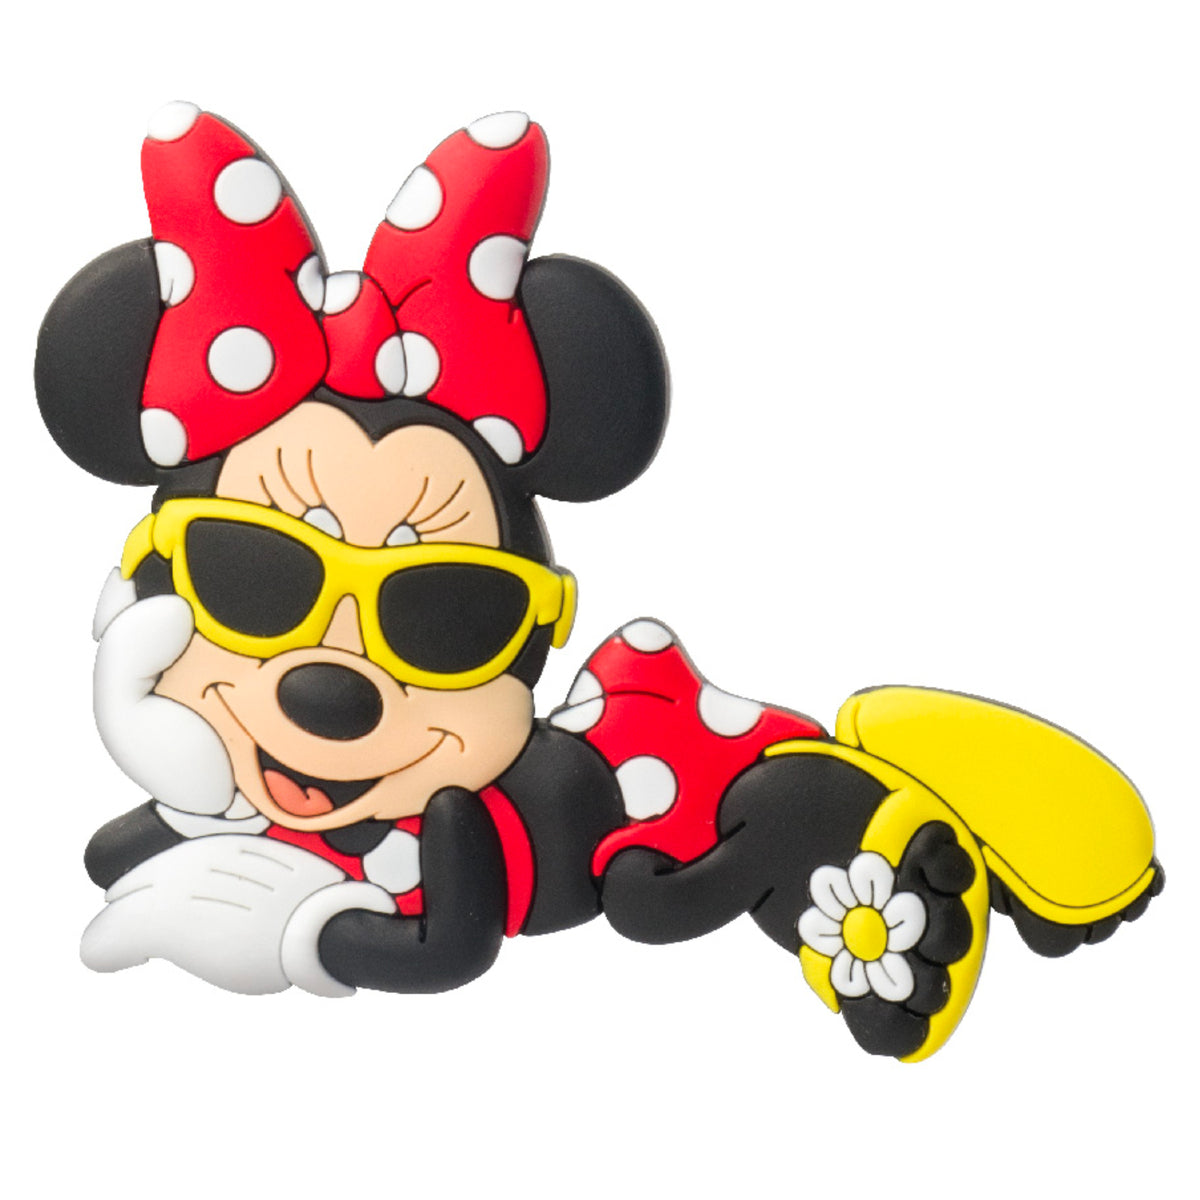 Minnie with sunglasses – Soft Touch PVC Magnet